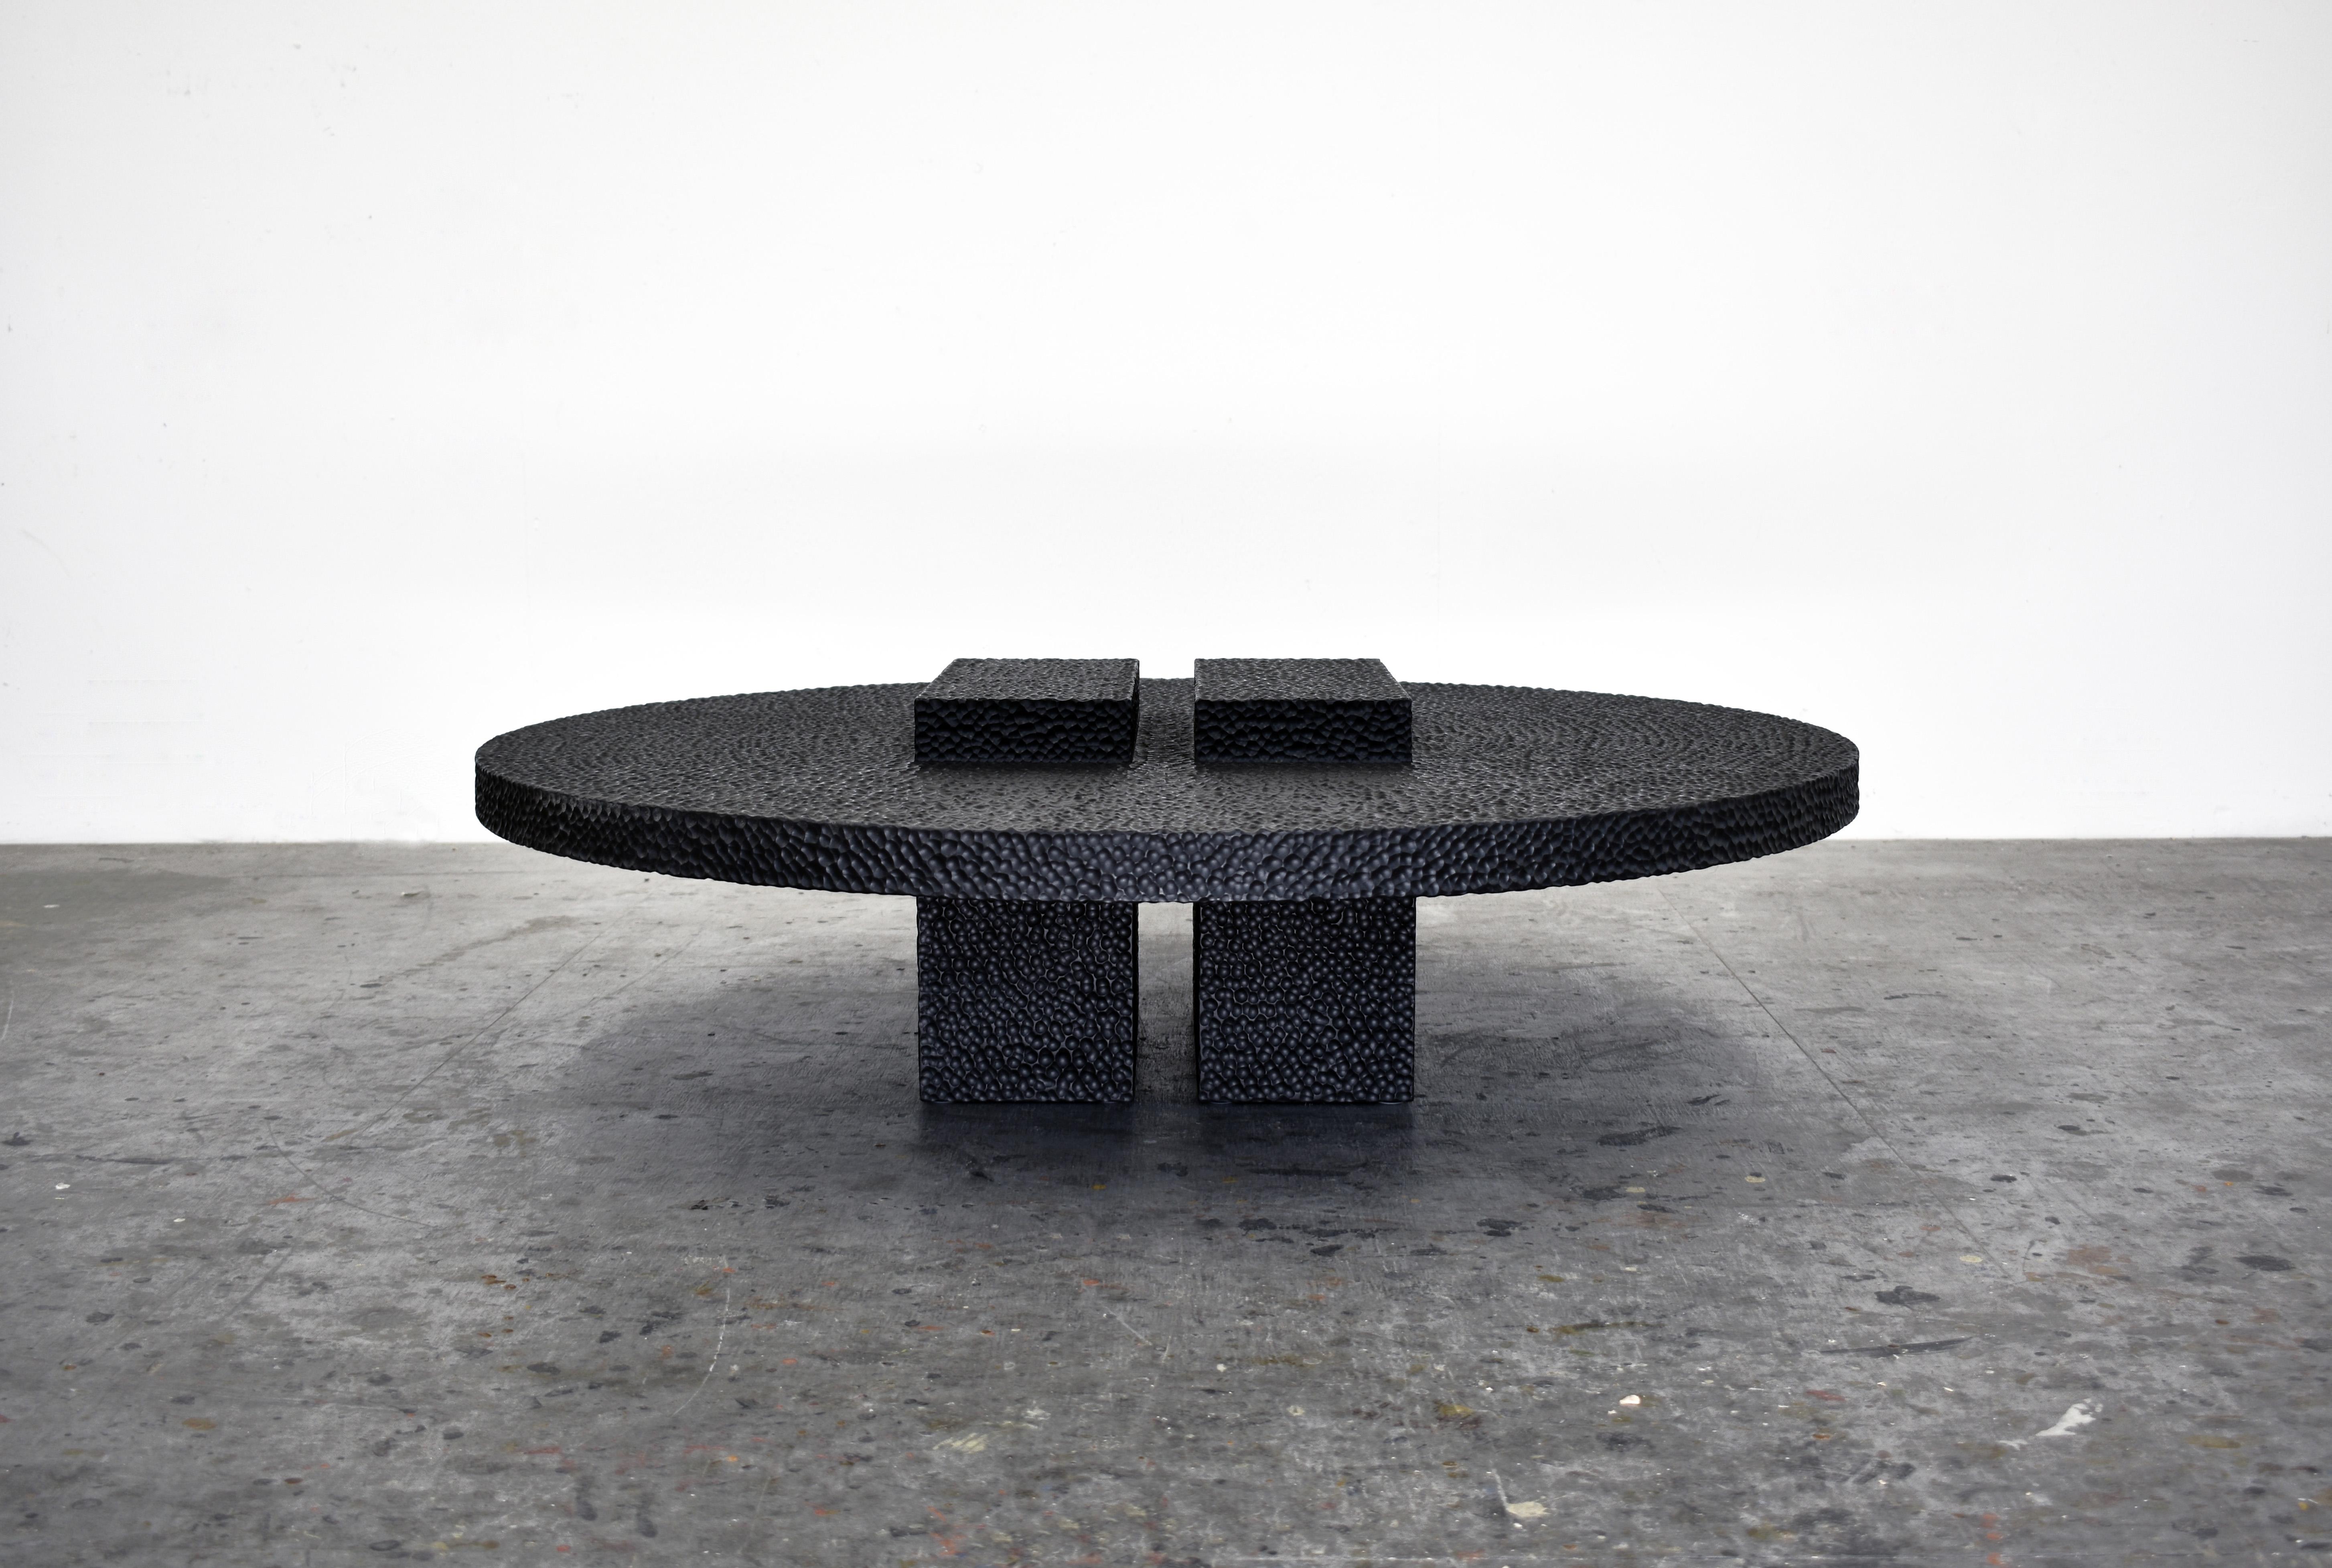 R3 maple round low table sculpted by John Eric Byers
Dimensions: 33 x diameter 122 cm
Materials: Carved blackened maple

All works are individually handmade to order.

John Eric Byers creates geometrically inspired pieces that are minimal,